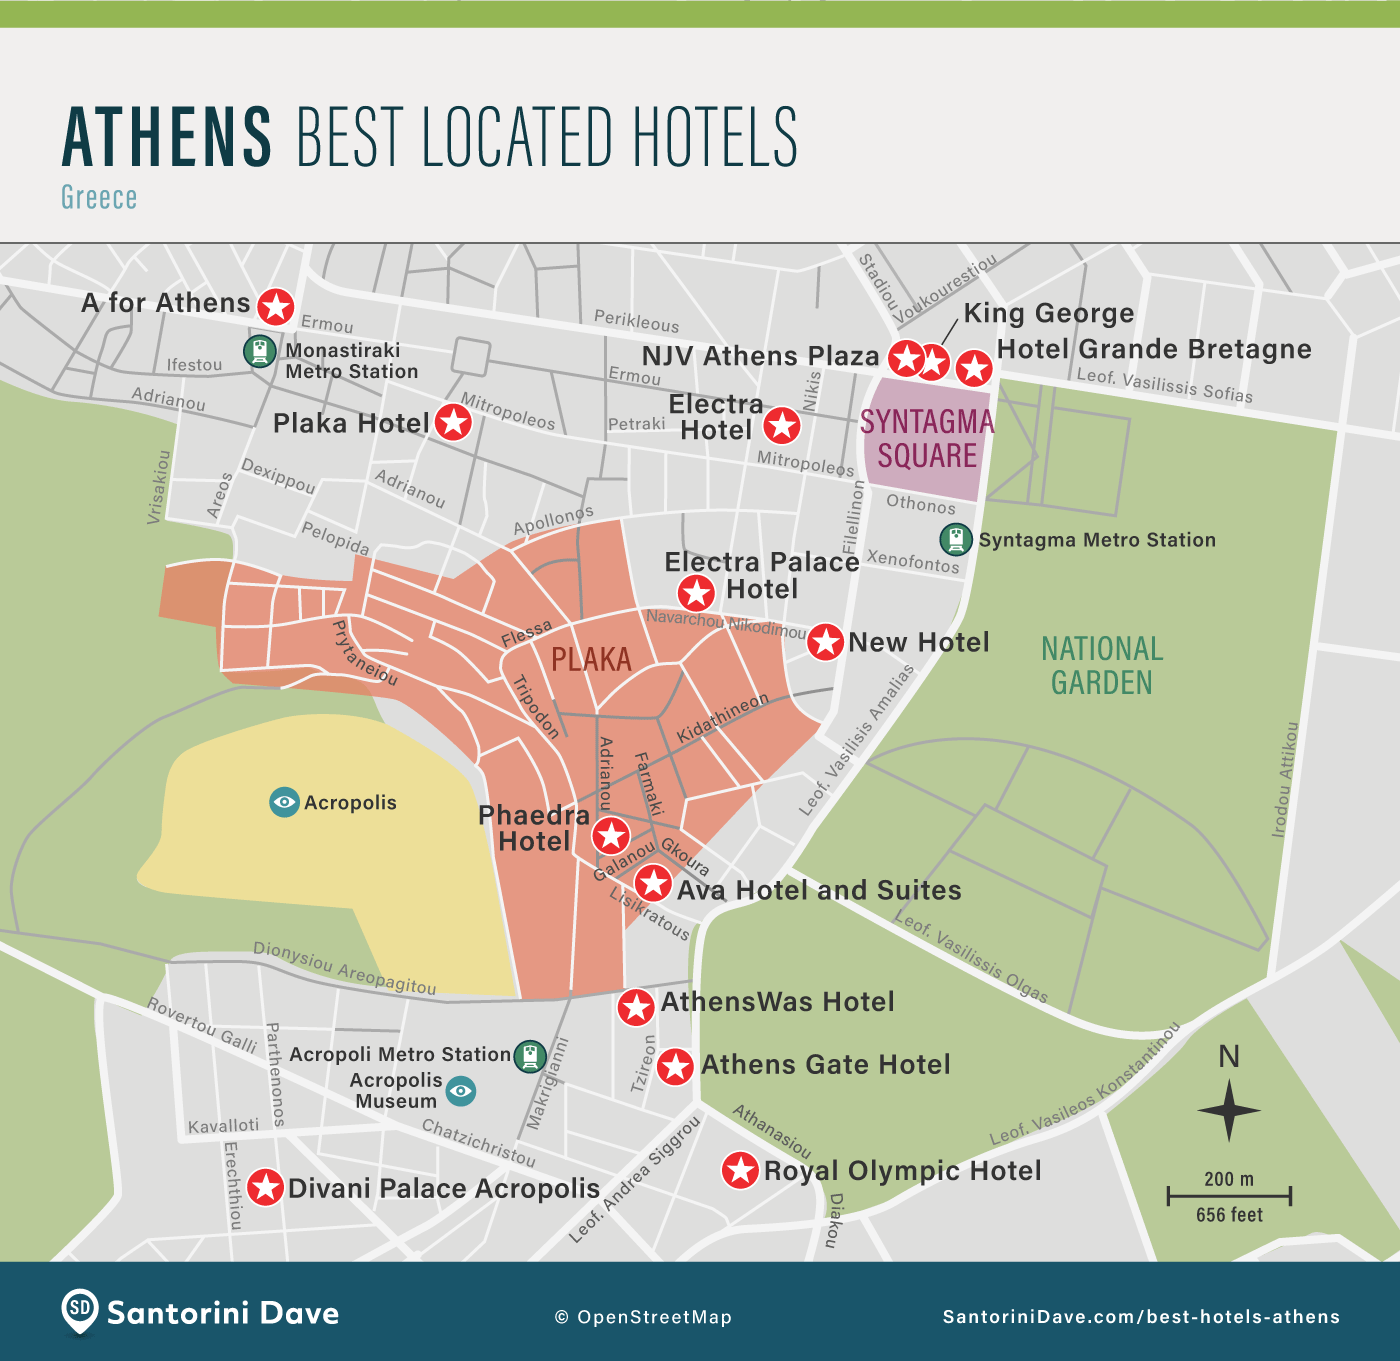 Map showing hotels and where to stay in central Athens.